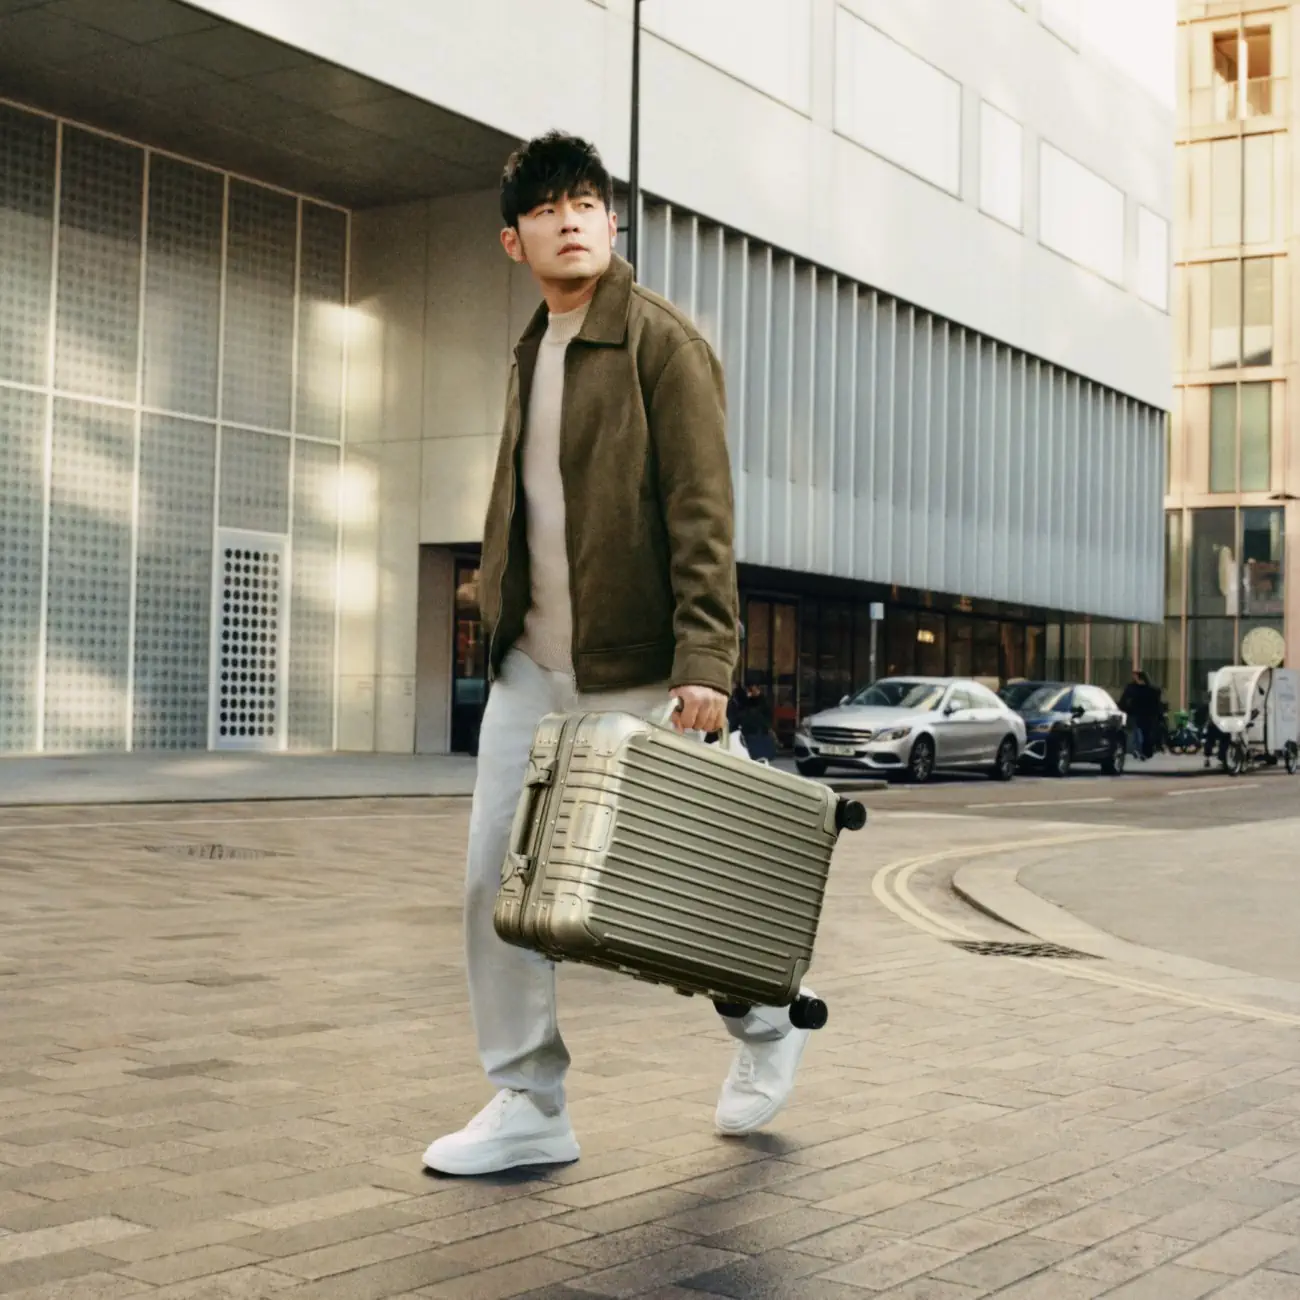 Jay Chou takes to the streets of London in Rimowa's latest ''Never Still'' campaign